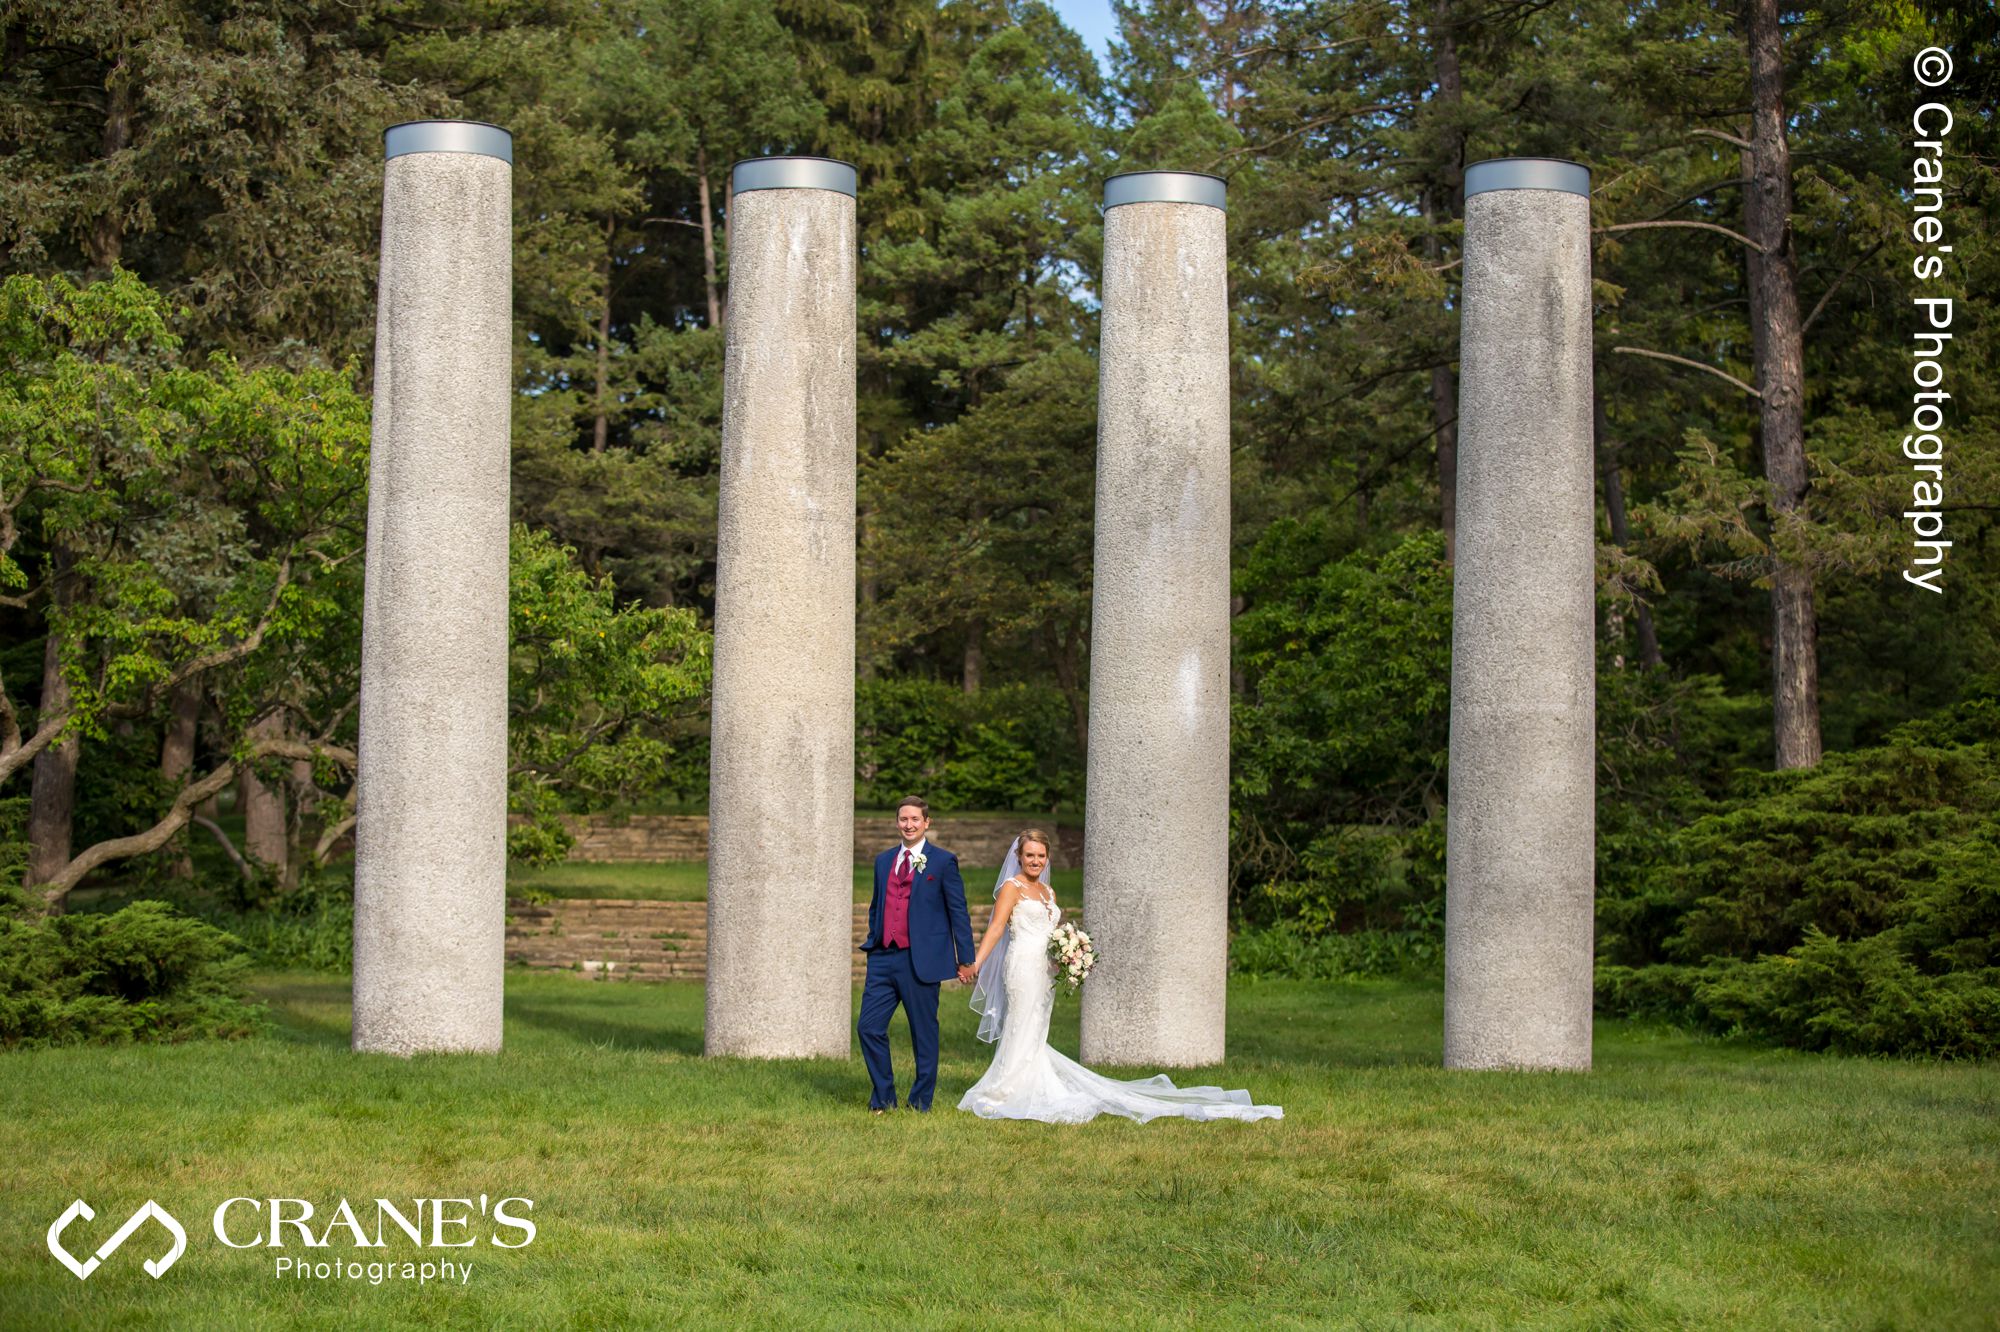 Posed wedding photo with 4 columns in the background at the Morton Arboretum